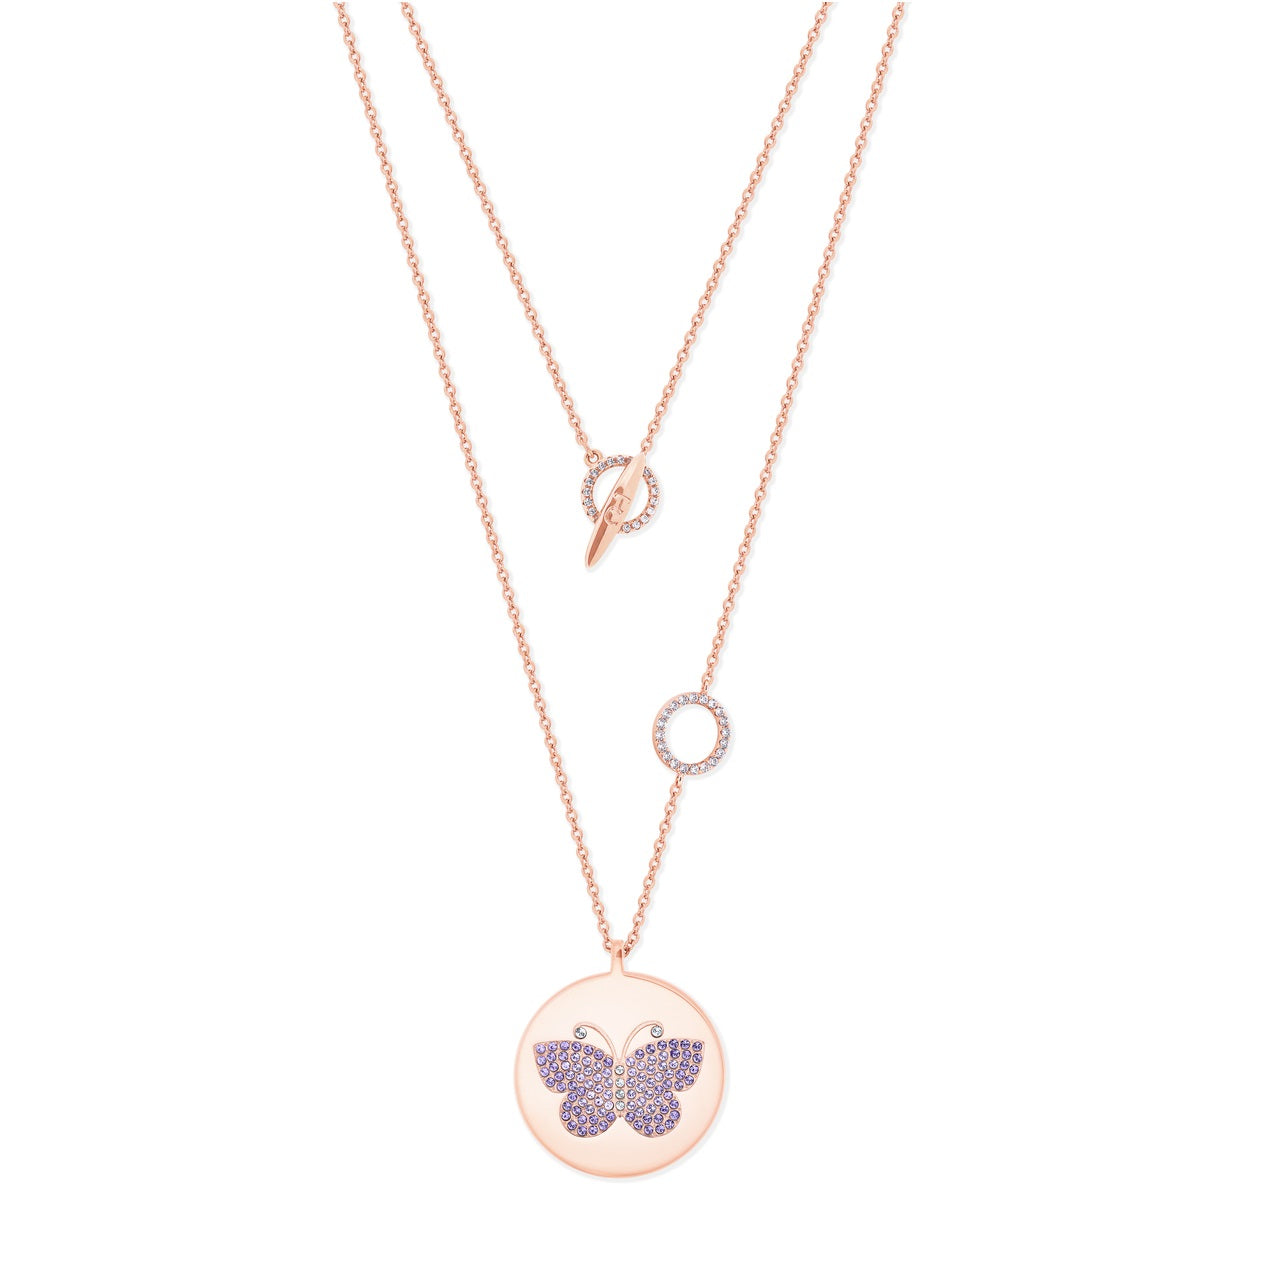 Tipperary Crystal Butterfly Disc Pendant  Drawing inspiration from urban garden, the Tipperary Crystal Butterfly collection transforms an icon into something modern and unexpected. Playful and elegant, this collection draws from the inherent beauty of the butterfly.